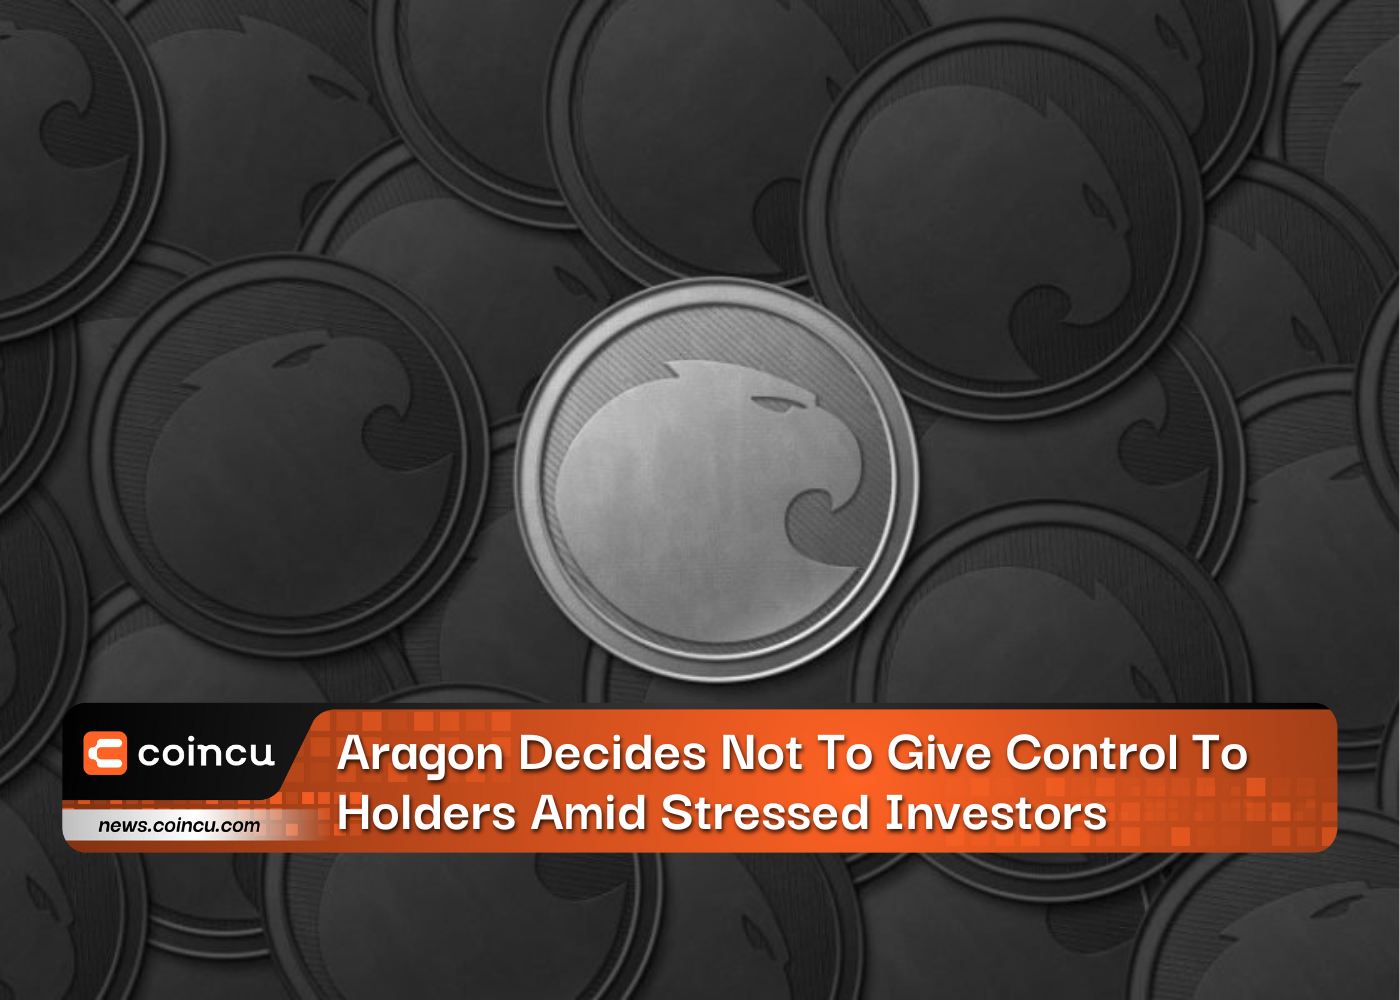 Aragon Decides Not To Give Control To Holders Amid Stressed Investors